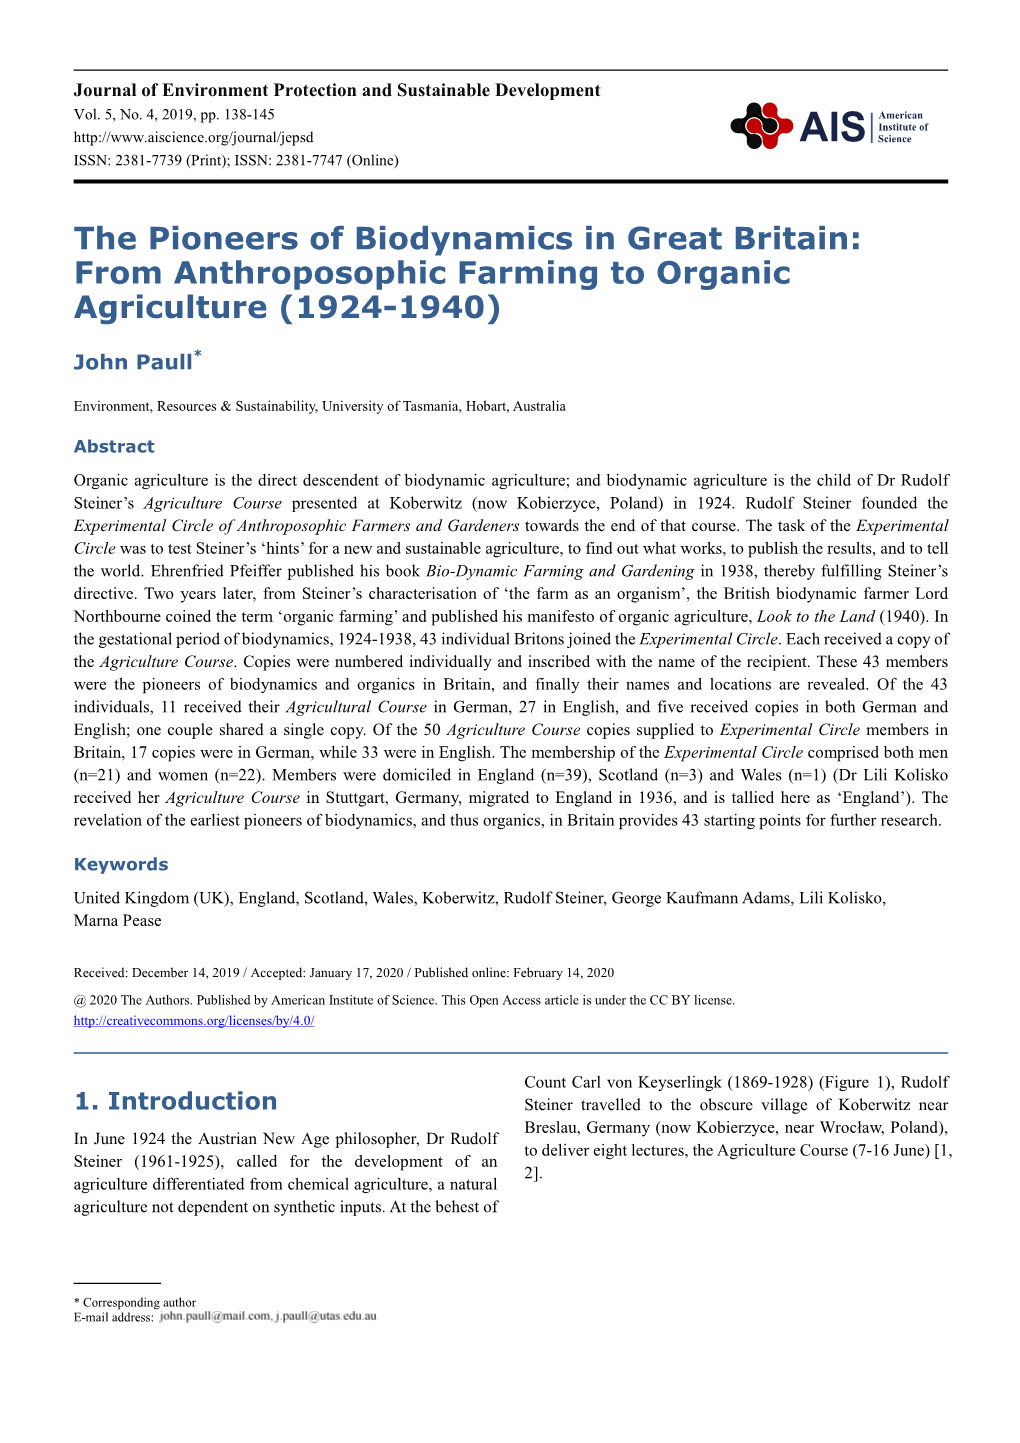 The Pioneers of Biodynamics in Great Britain: from Anthroposophic Farming to Organic Agriculture (1924-1940)